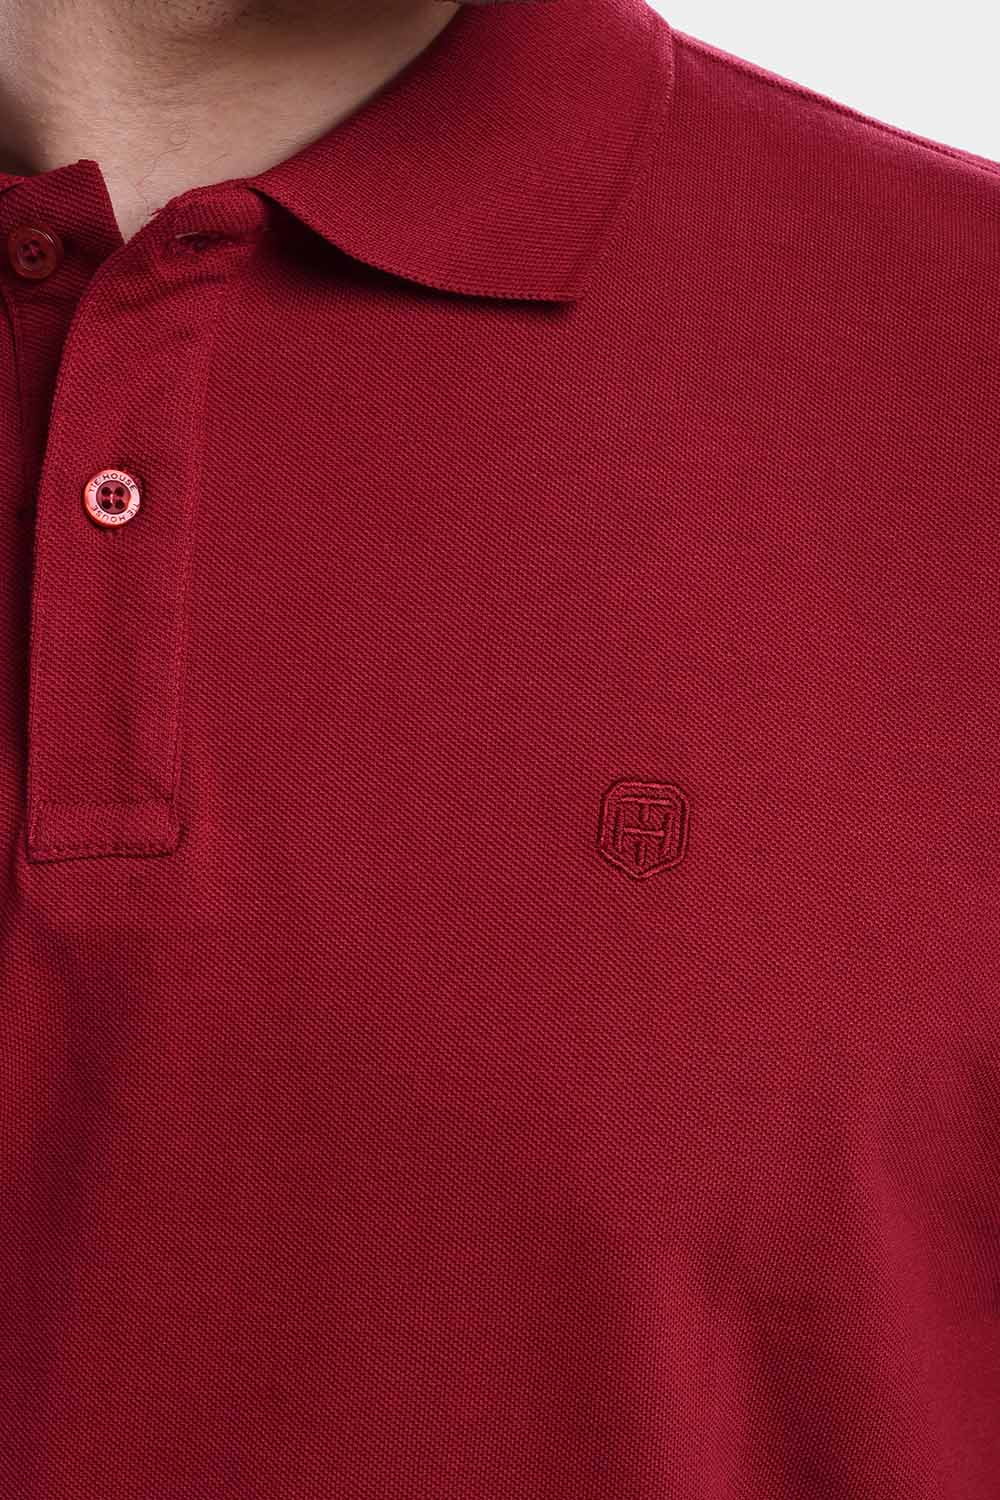 Polo Shirt Regular Fit Dark Red - TIE HOUSE